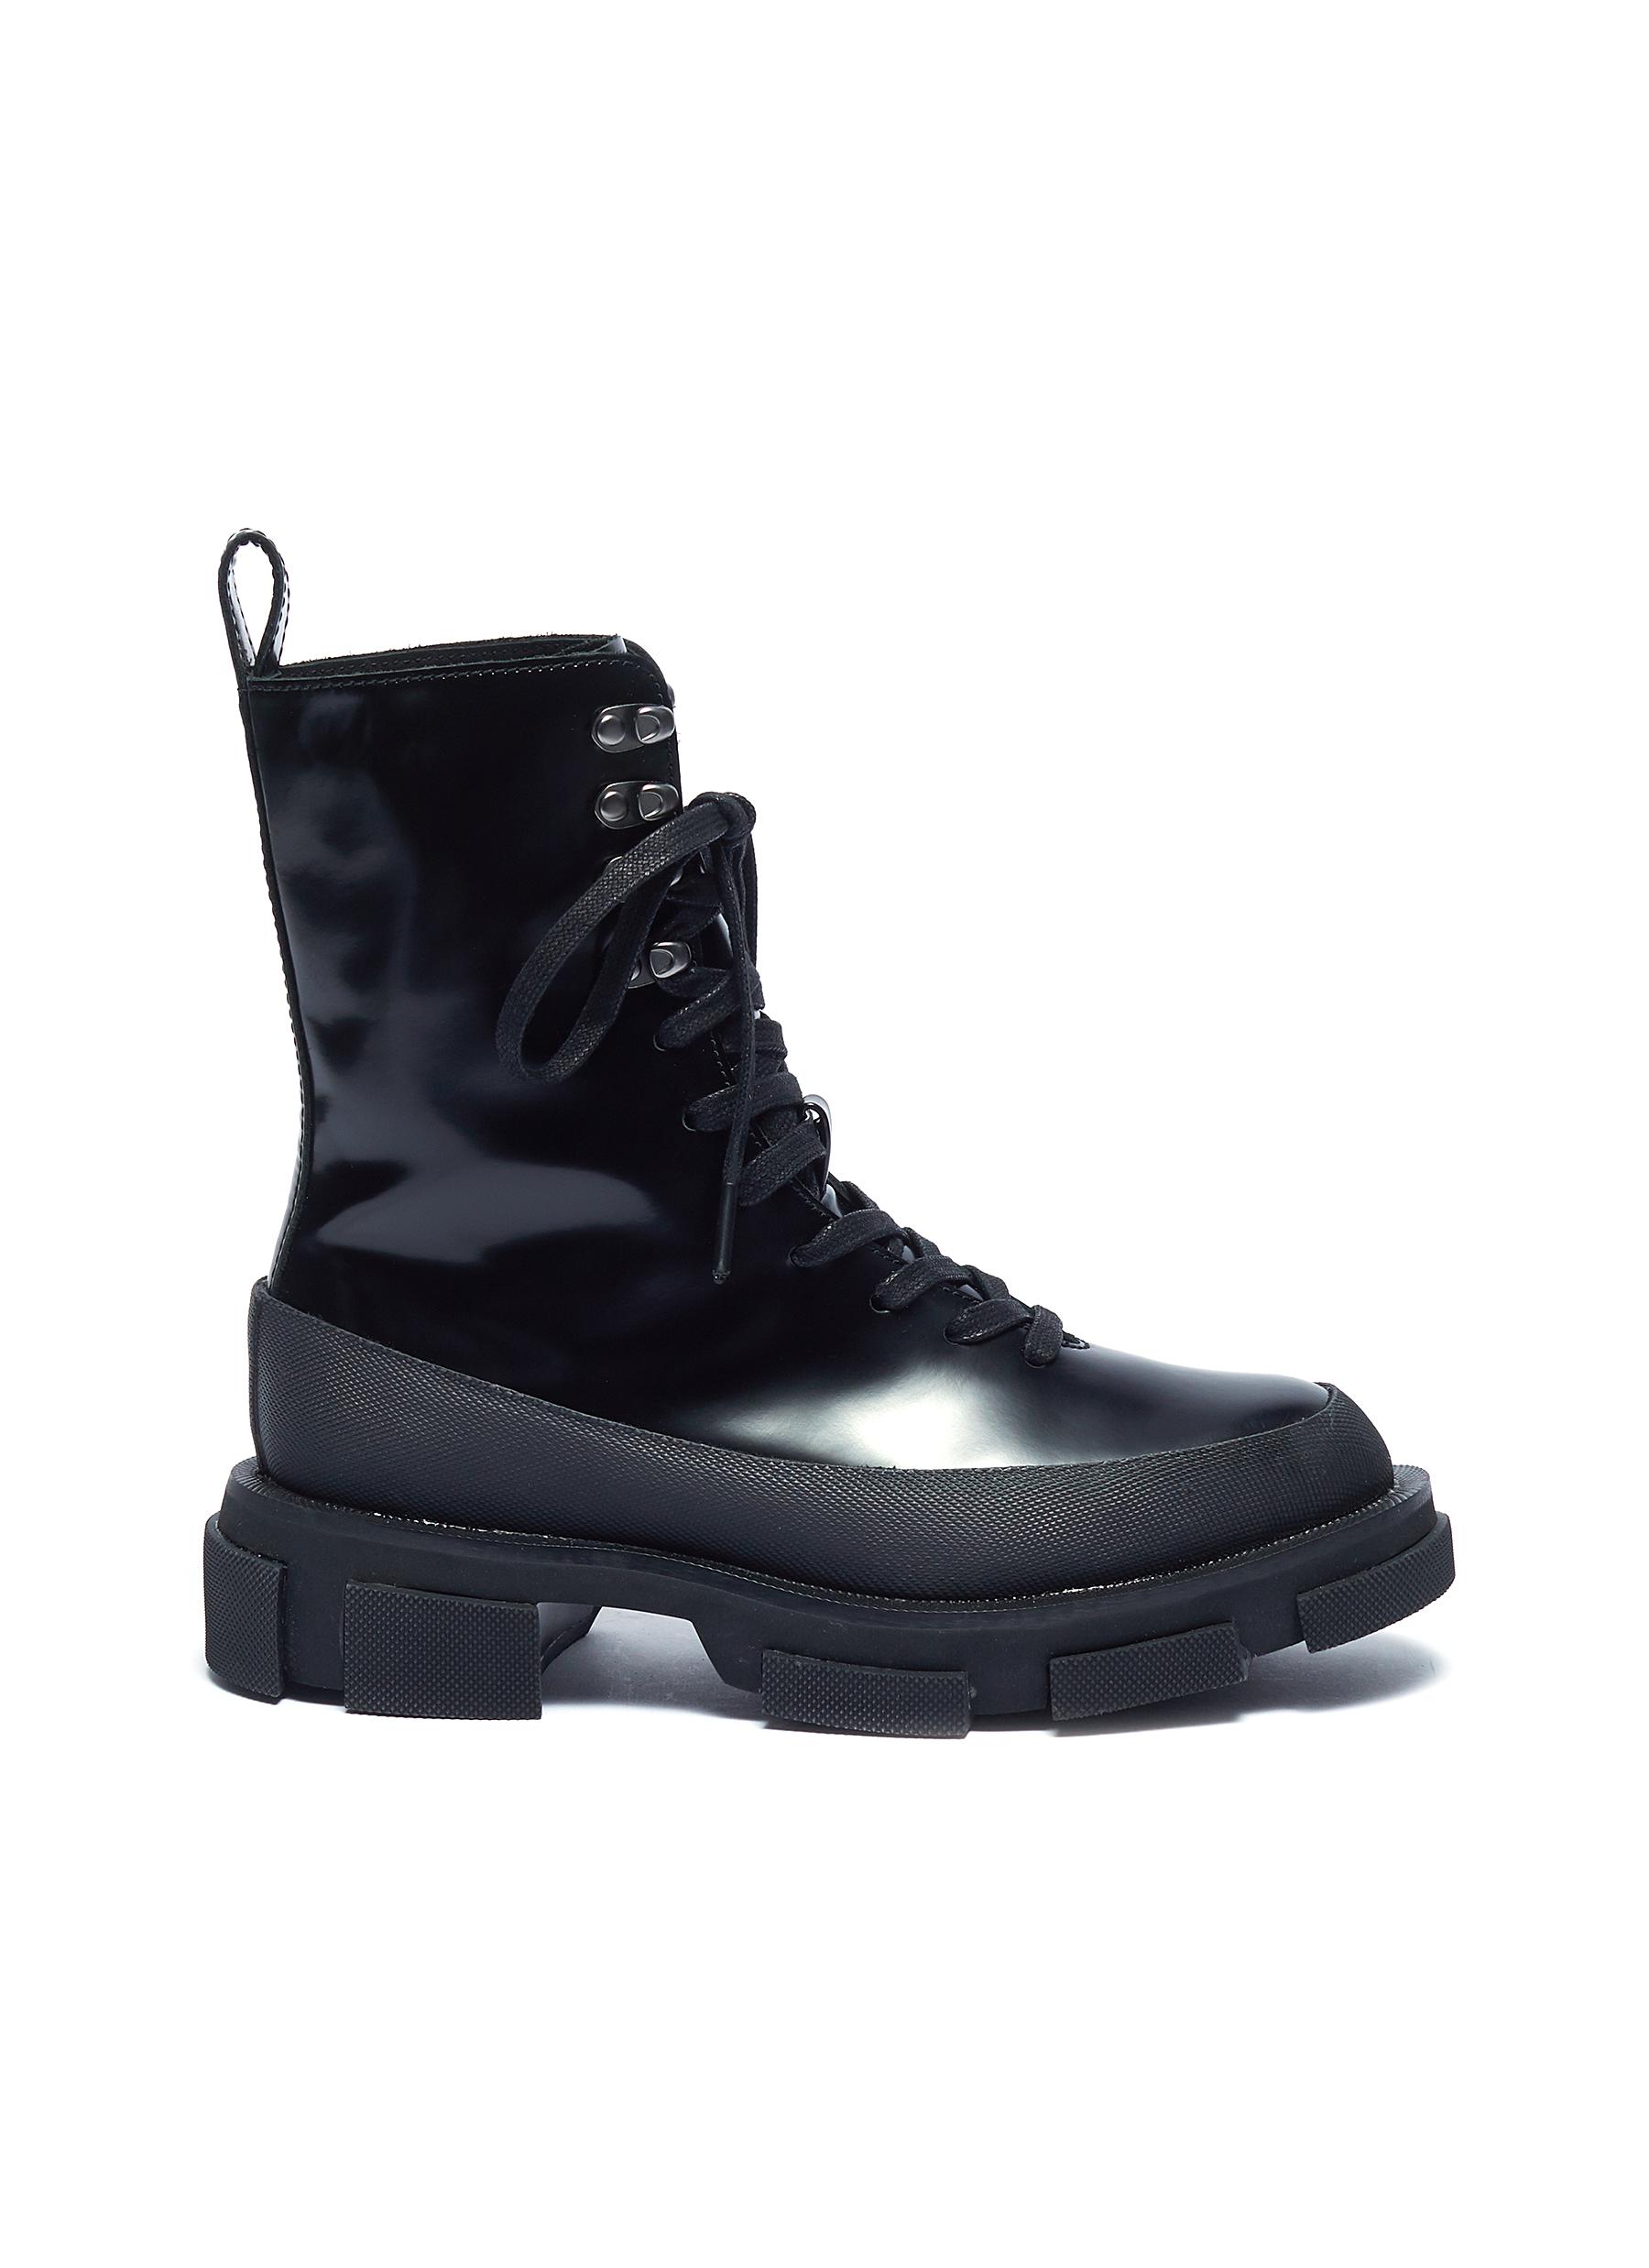 Gao leather combat boots by Both | Coshio Online Shop